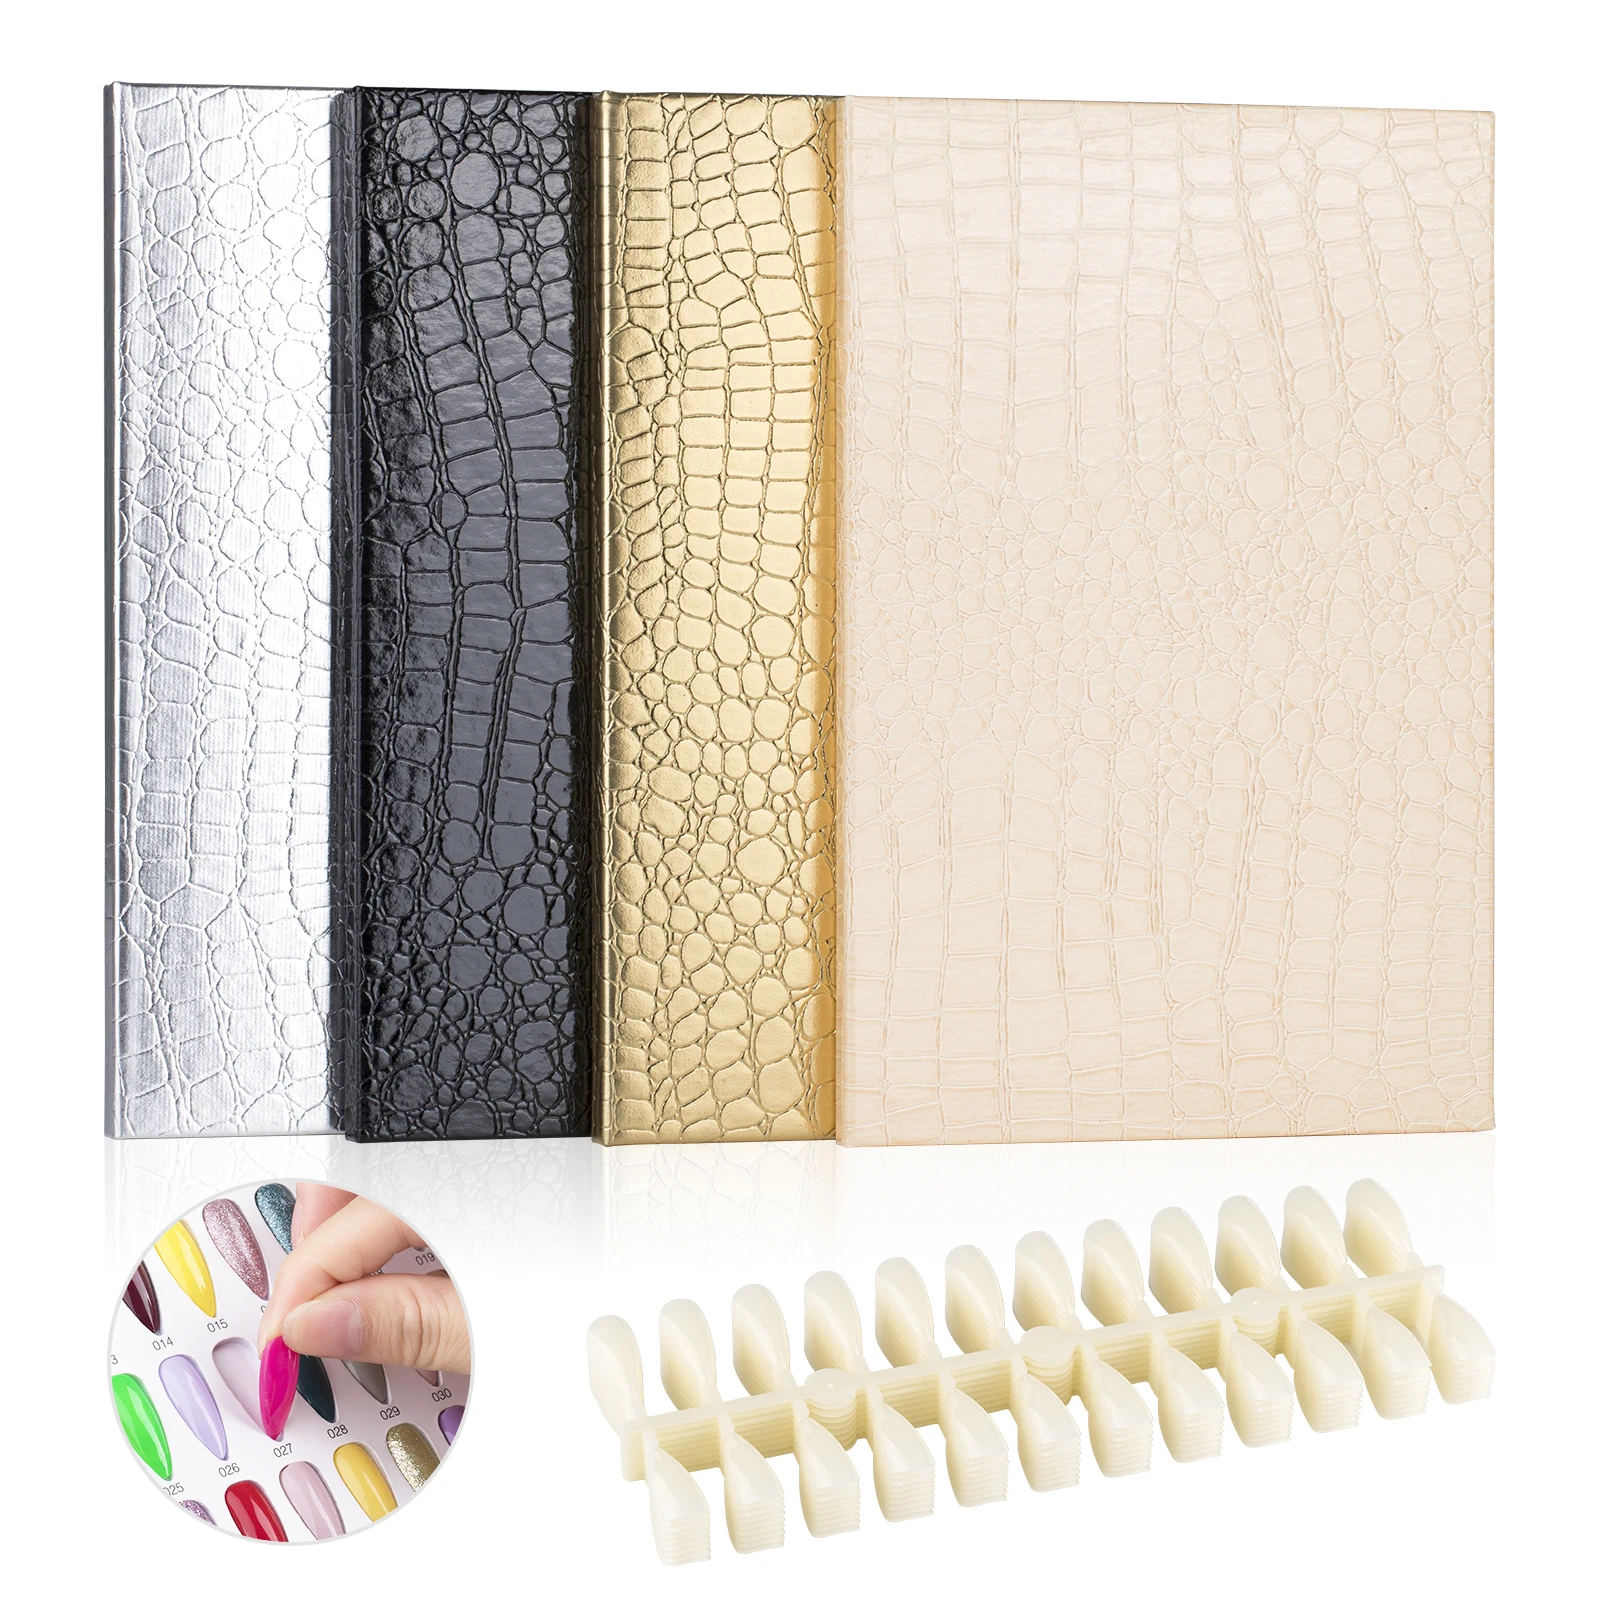 

TP 160/180/216 Colors Nail Tips Display Book Leather Gel Polish Swatch Chart Salon Tools Diy Art Showing Shelf Coloring Books